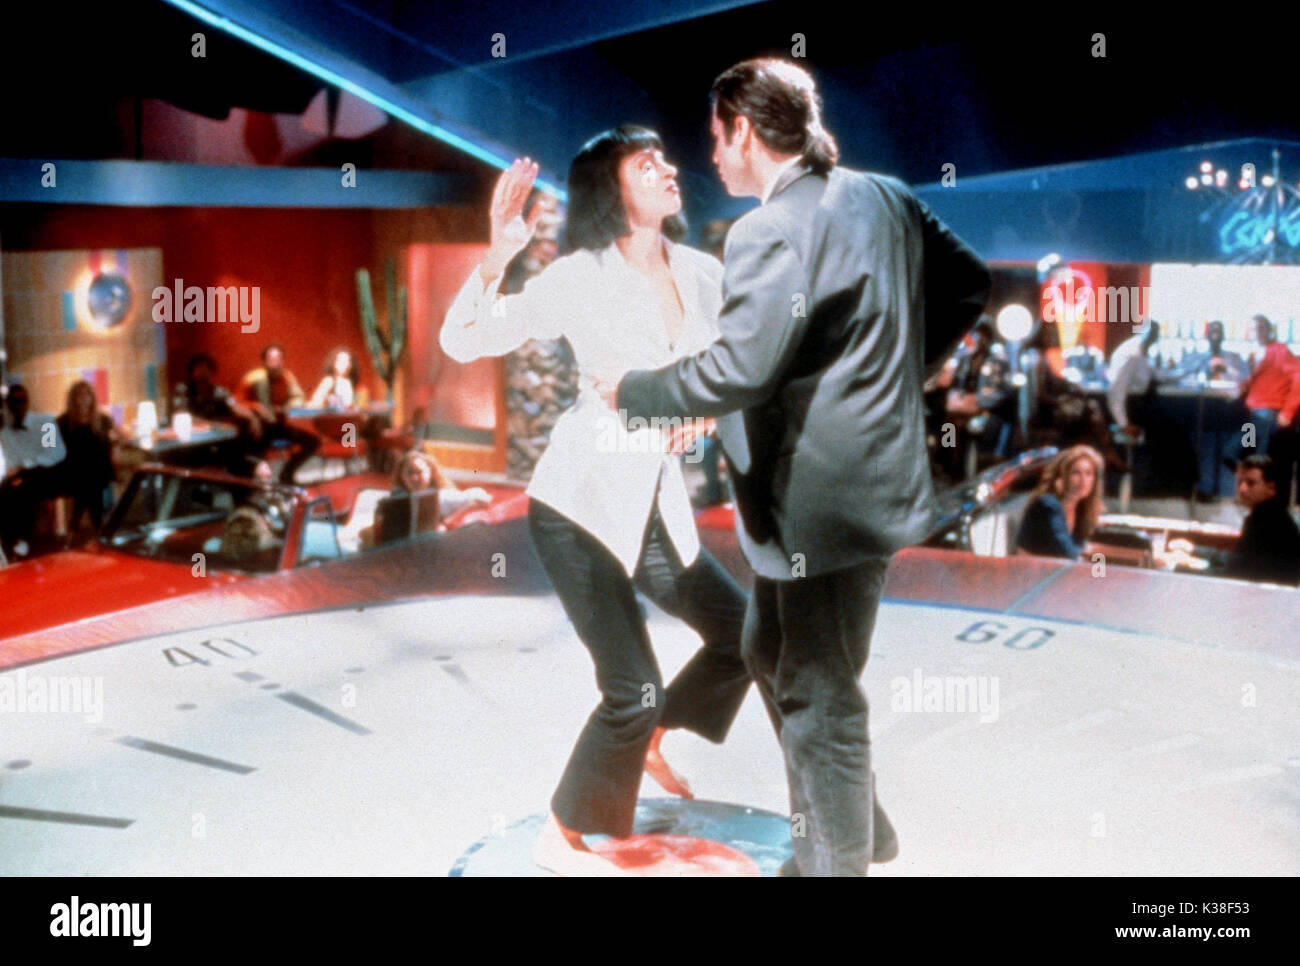 PULP FICTION A BAND APART/JERSEY FILMS/MIRAMAX UMA THURMAN, JOHN TRAVOLTA Picture from Ronald Grant Archive     Date: 1994 Stock Photo